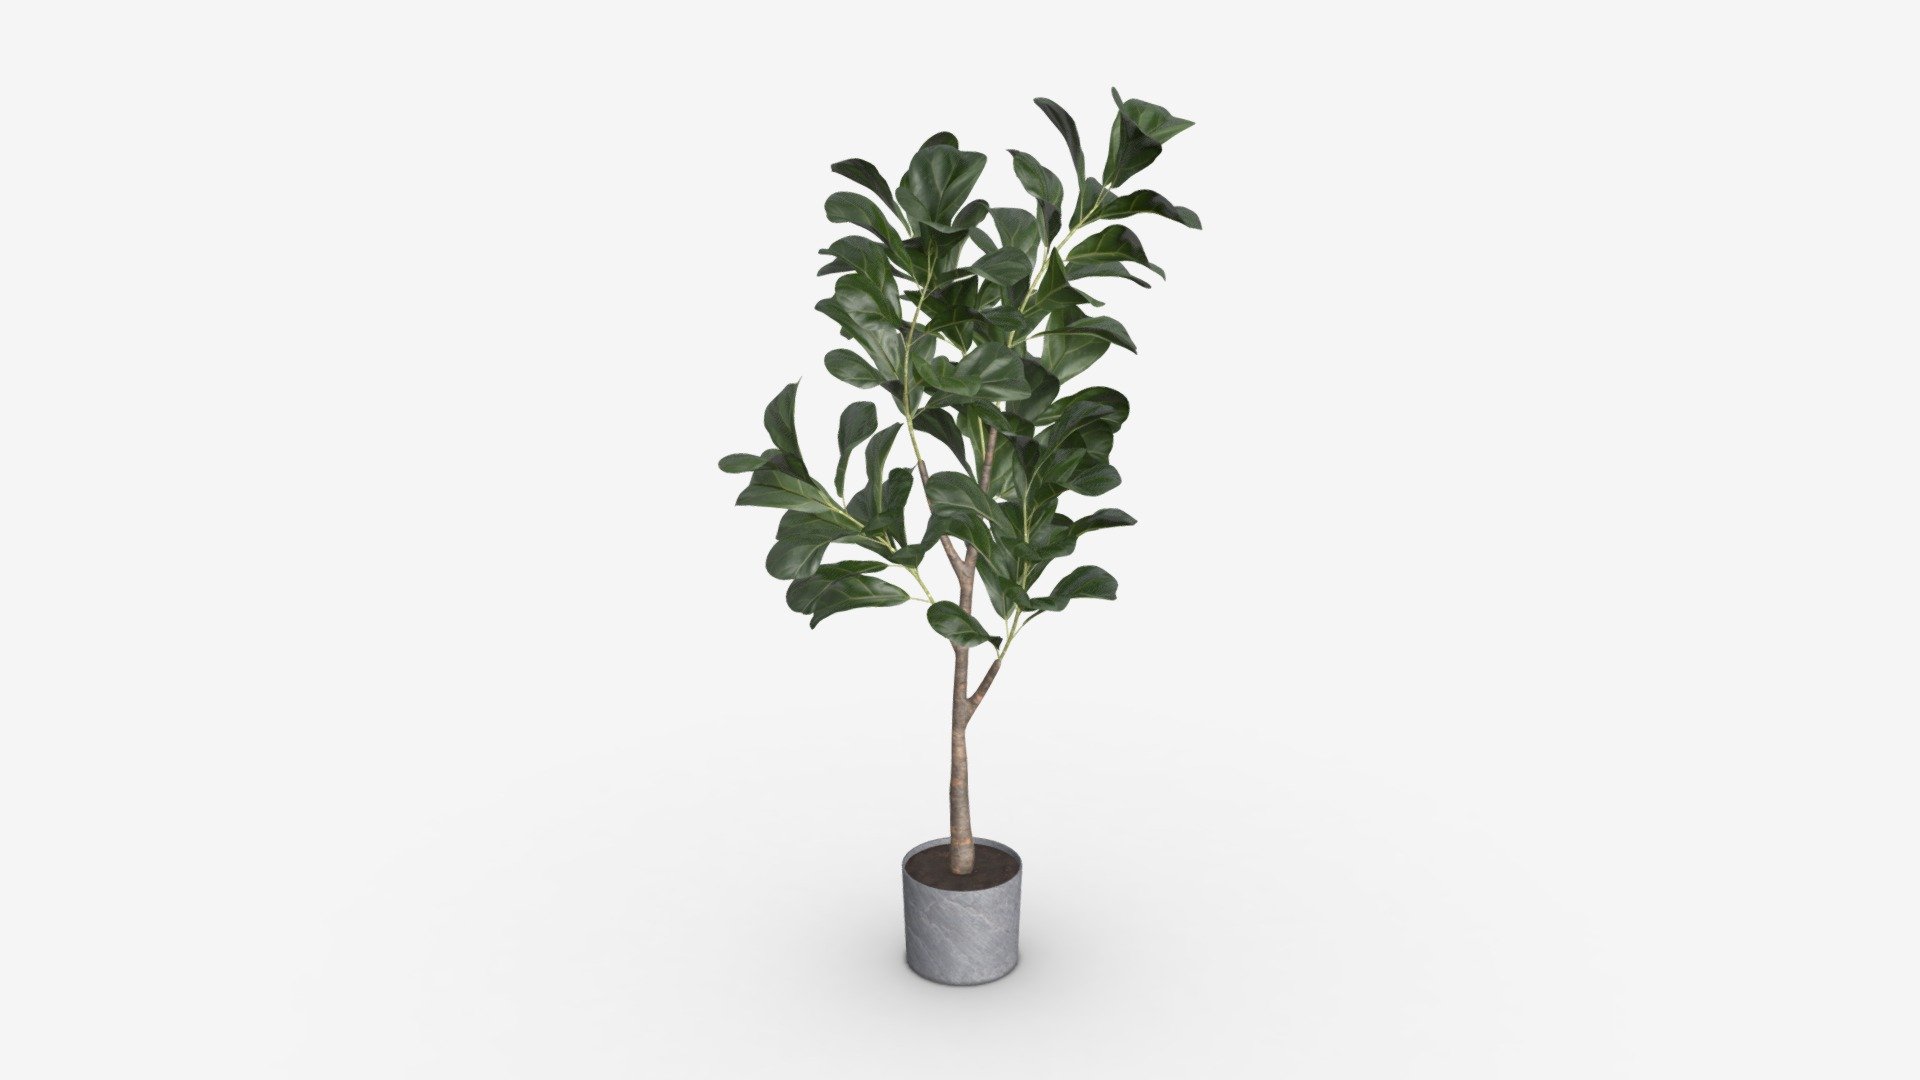 Artificial Ficus Plant in Pot - Buy Royalty Free 3D model by HQ3DMOD (@AivisAstics) 3d model